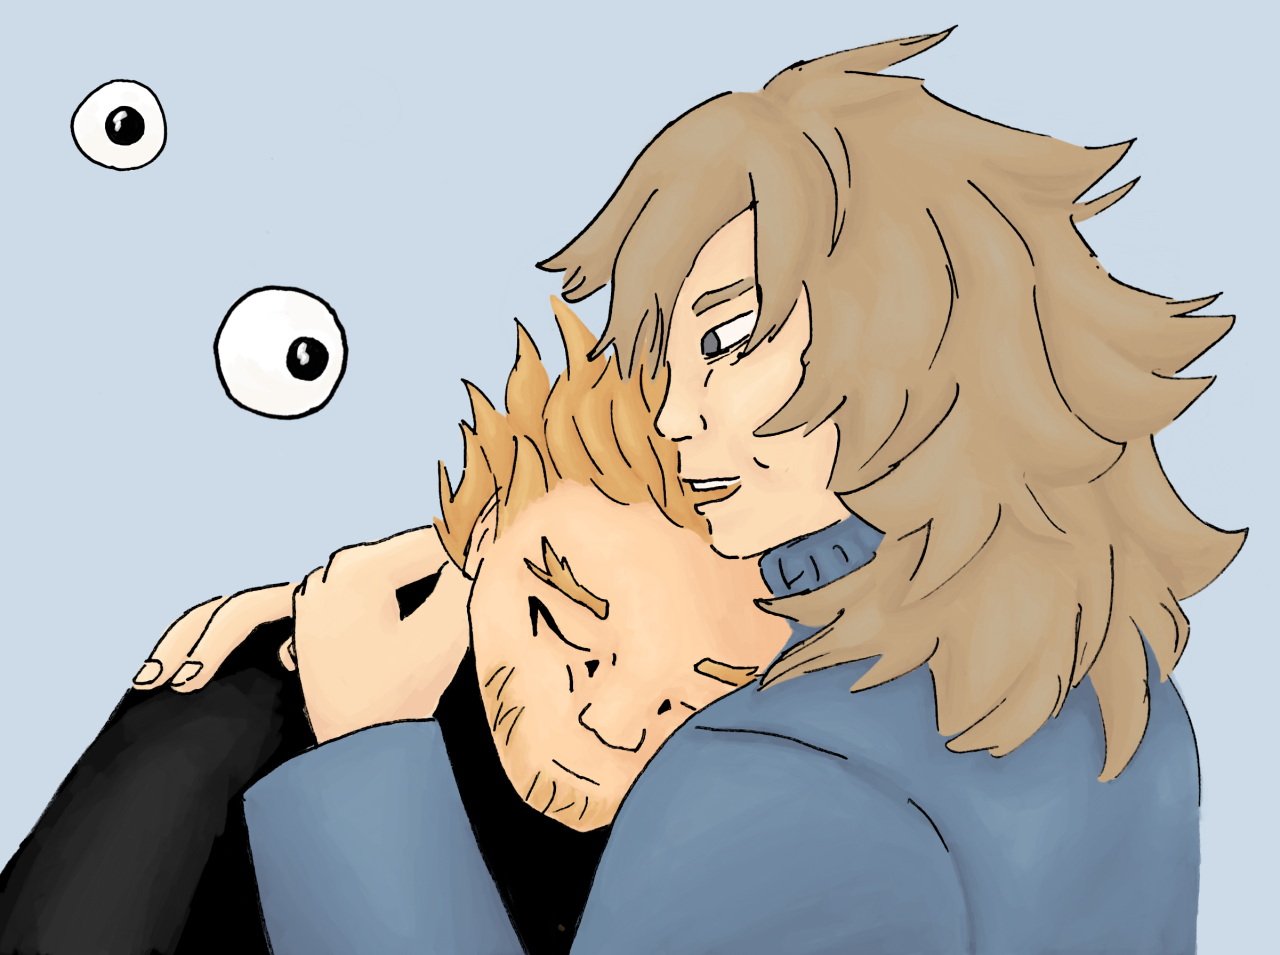 digital art: hawks mom is giving him a hug, only their heads and shoulders are visible. You can see Hawks’ Mom’s quirk in the background